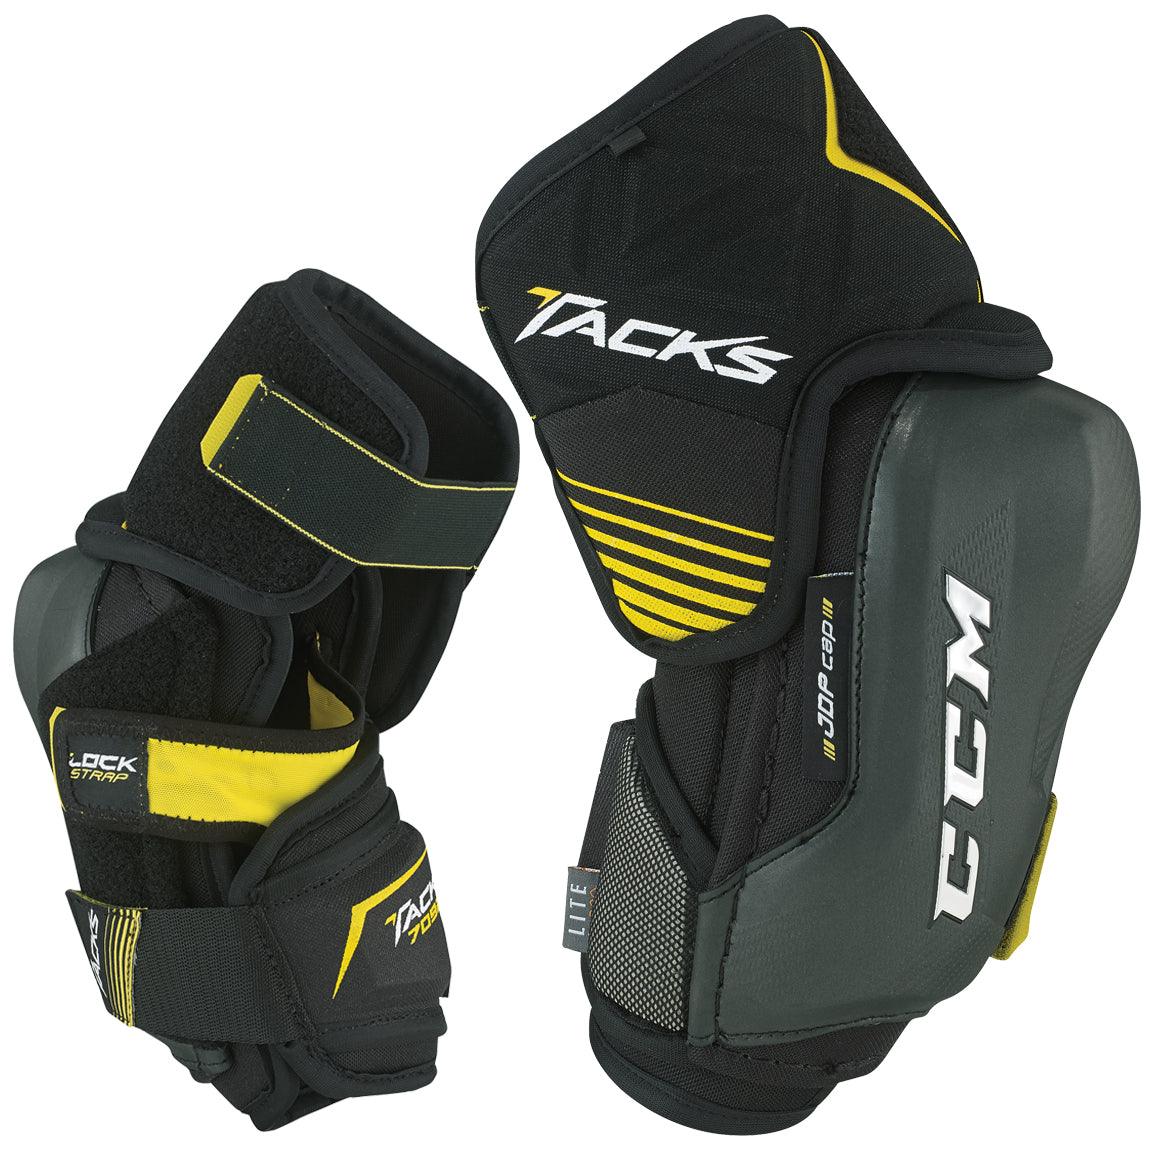 Tacks 7092 Elbow Pads - Junior - Sports Excellence